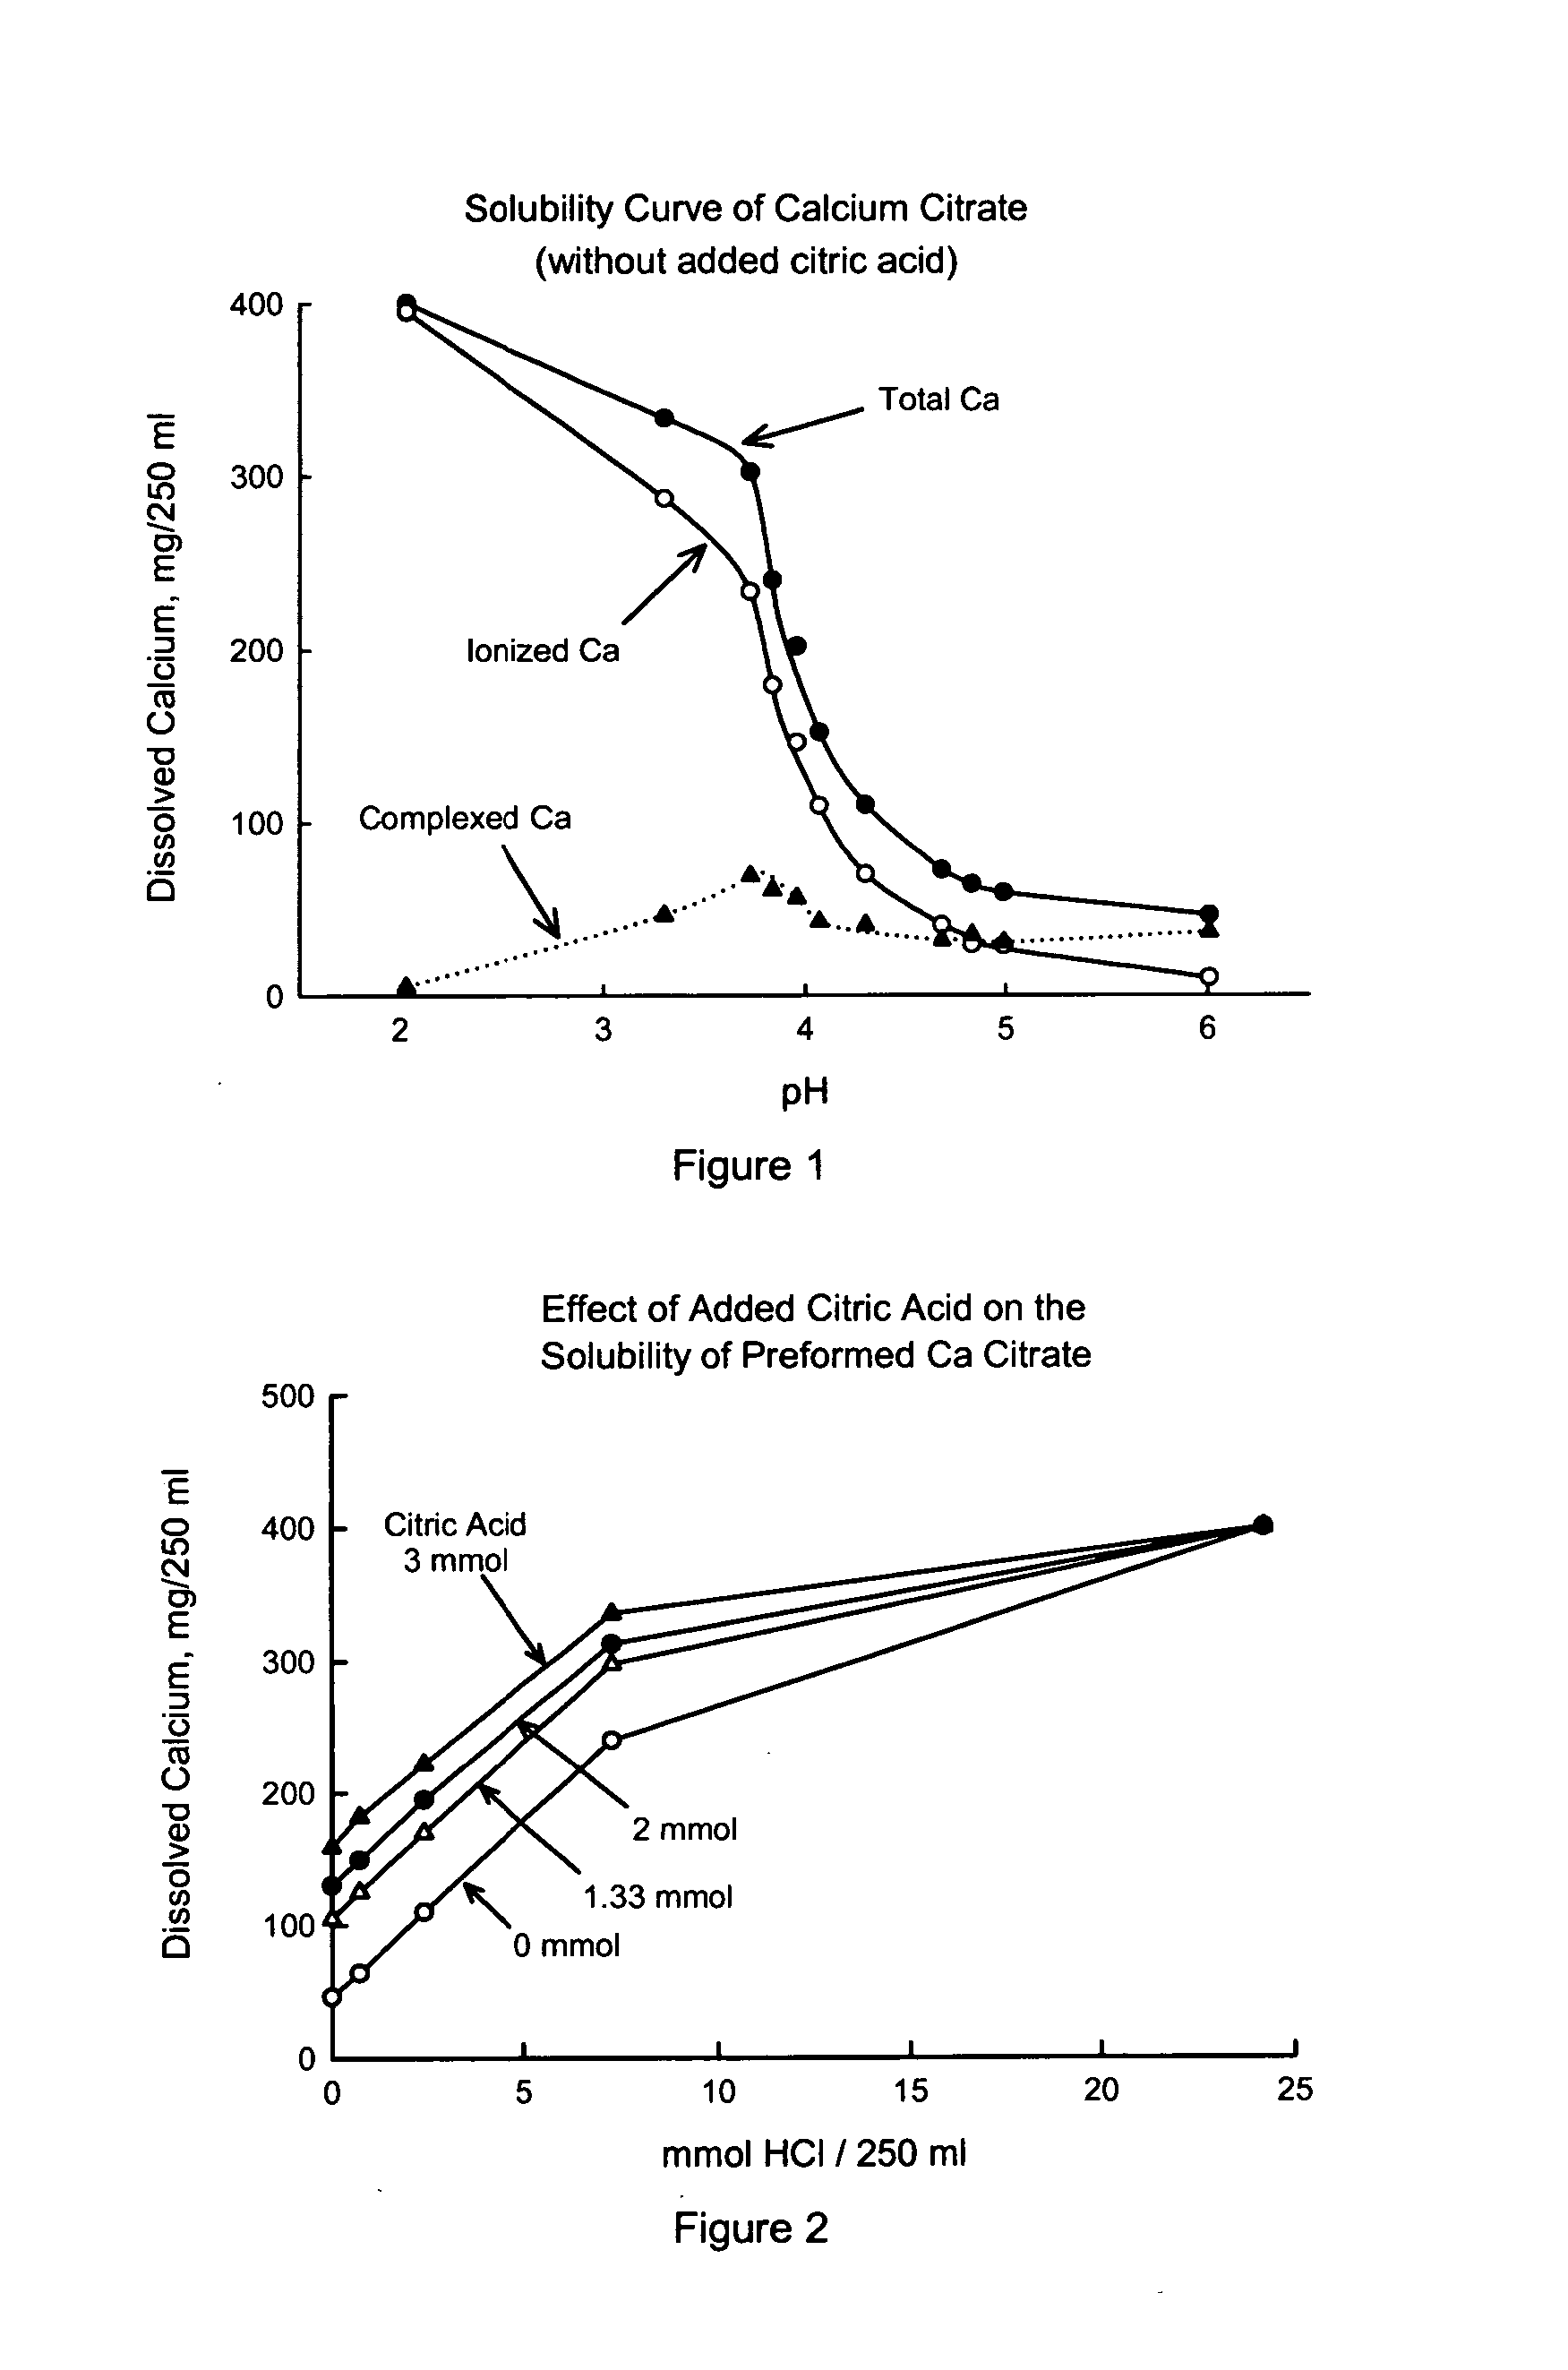 Enhanced solubility of preformed calcium citrate by adding citric acid